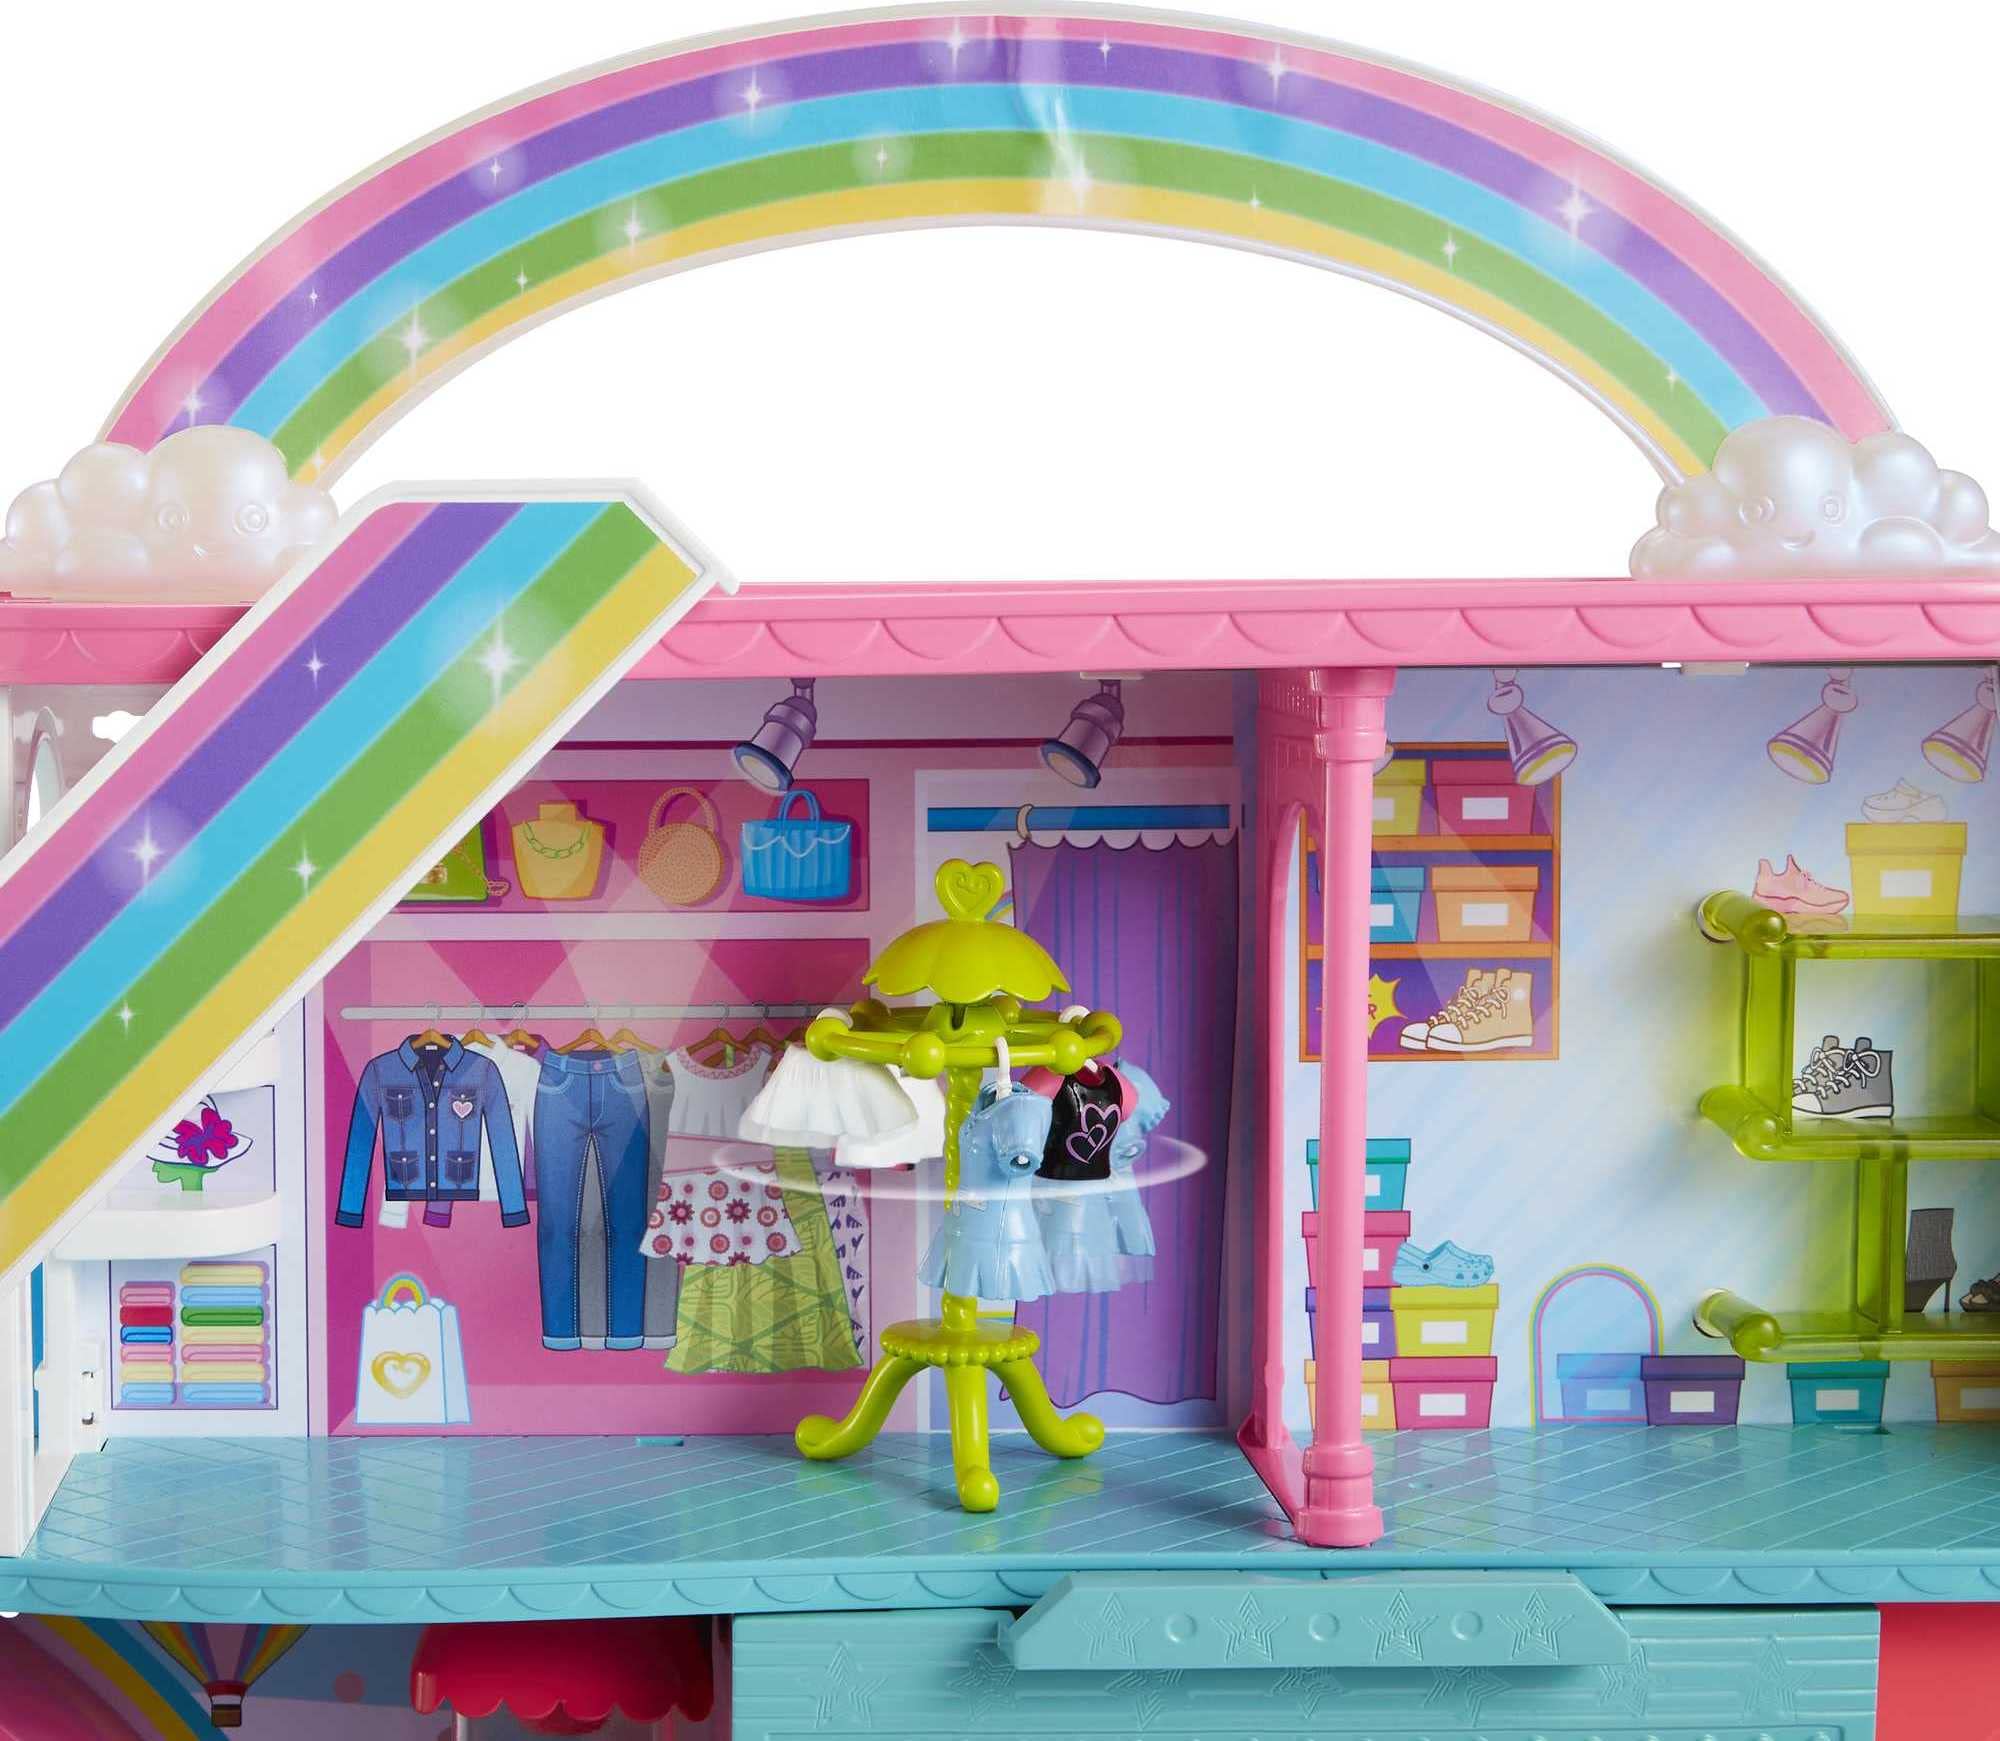 Polly Pocket Playset with 3-Inch Doll, 35+ Accessories, Sweet Adventures Rainbow Mall, 3 Floors, 9 Play Areas